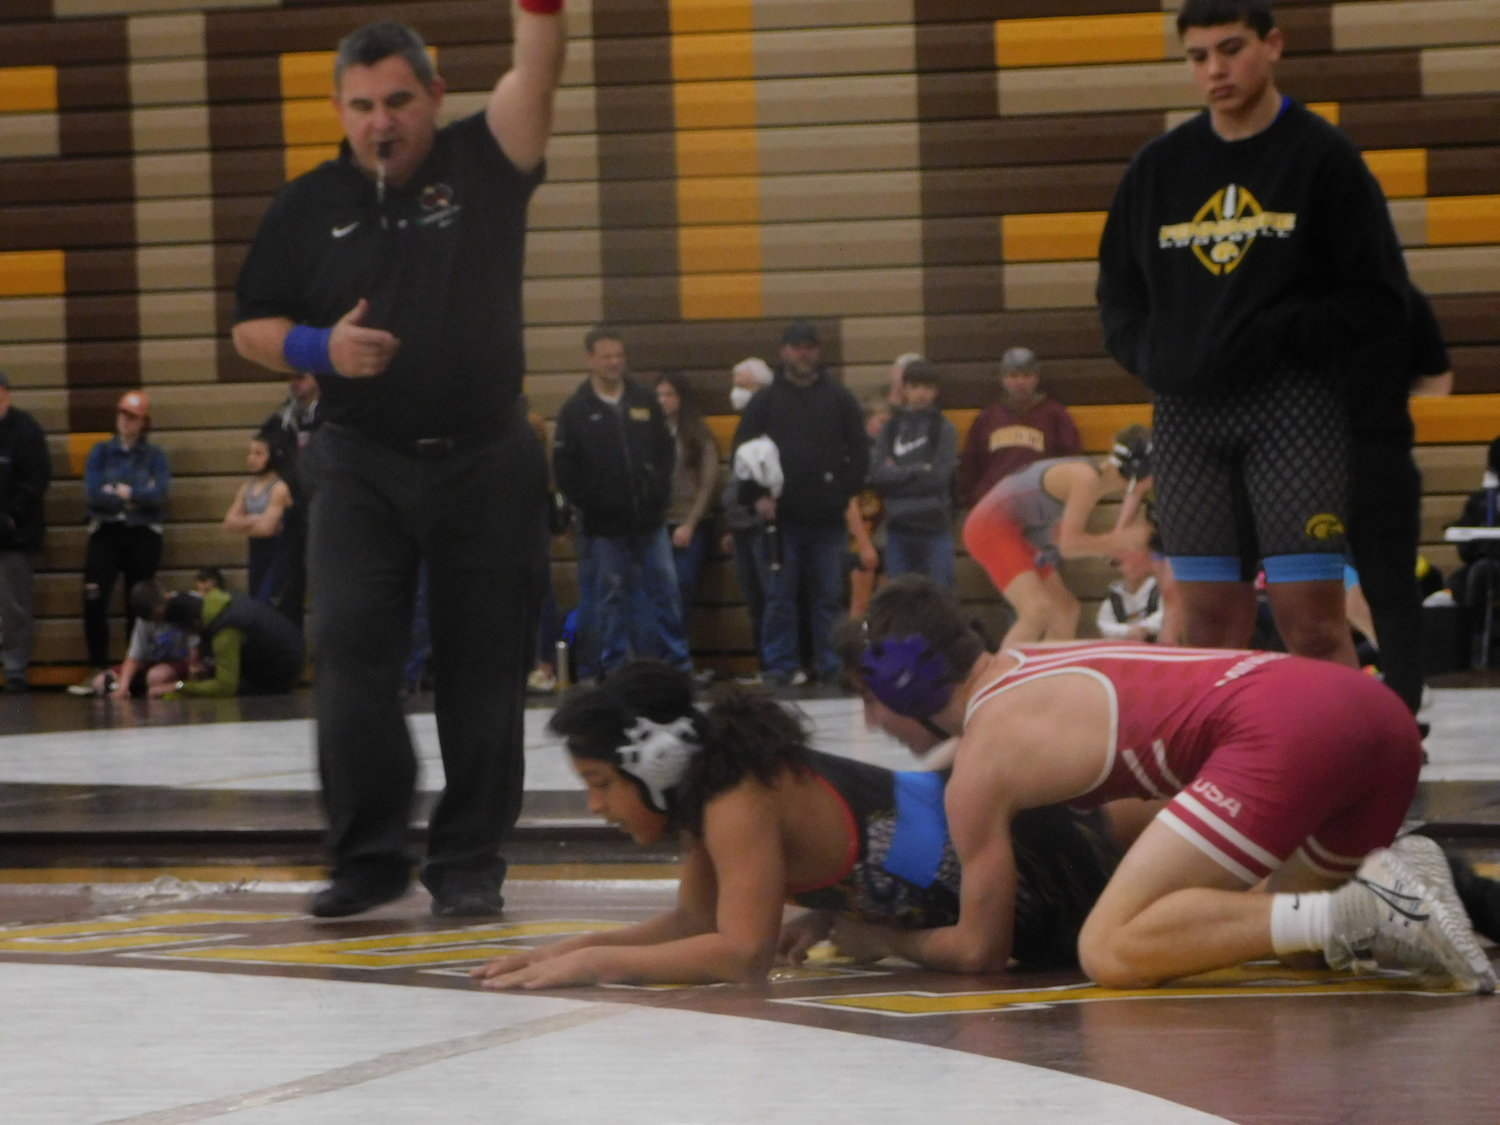 Hayden Holst with a Takedown at the Apple Valley Open